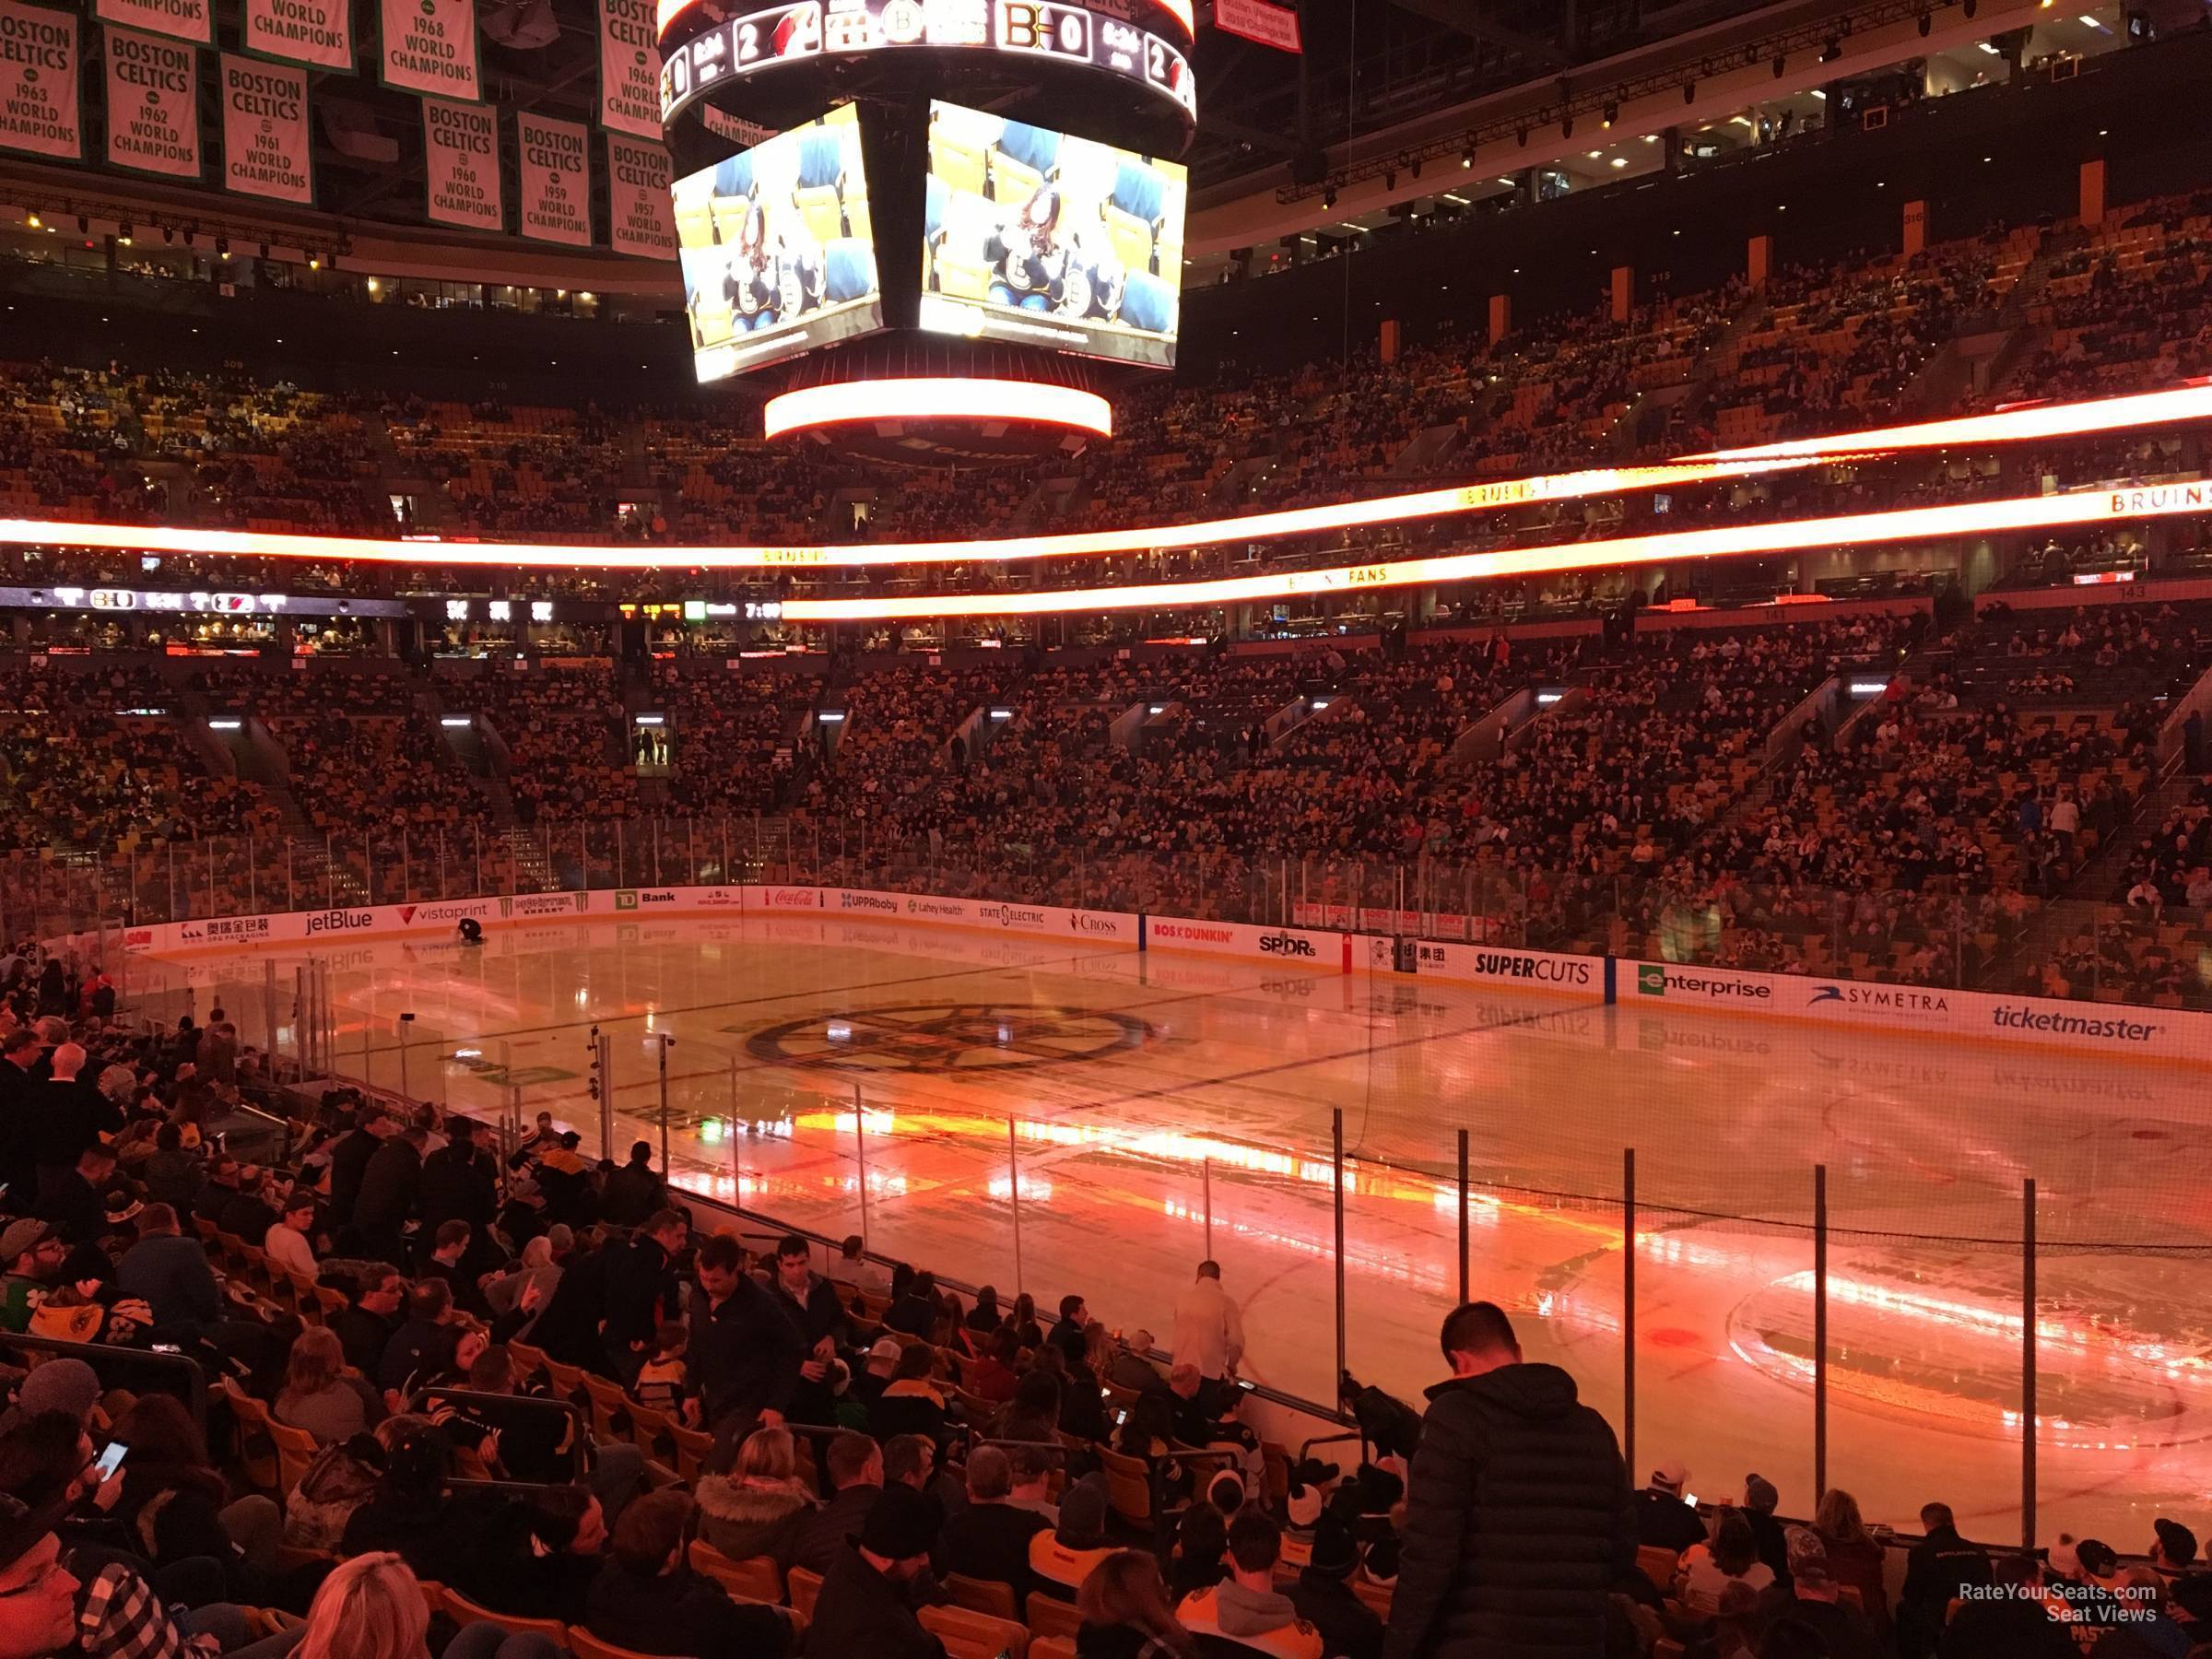 loge 20, row 15 seat view  for hockey - td garden